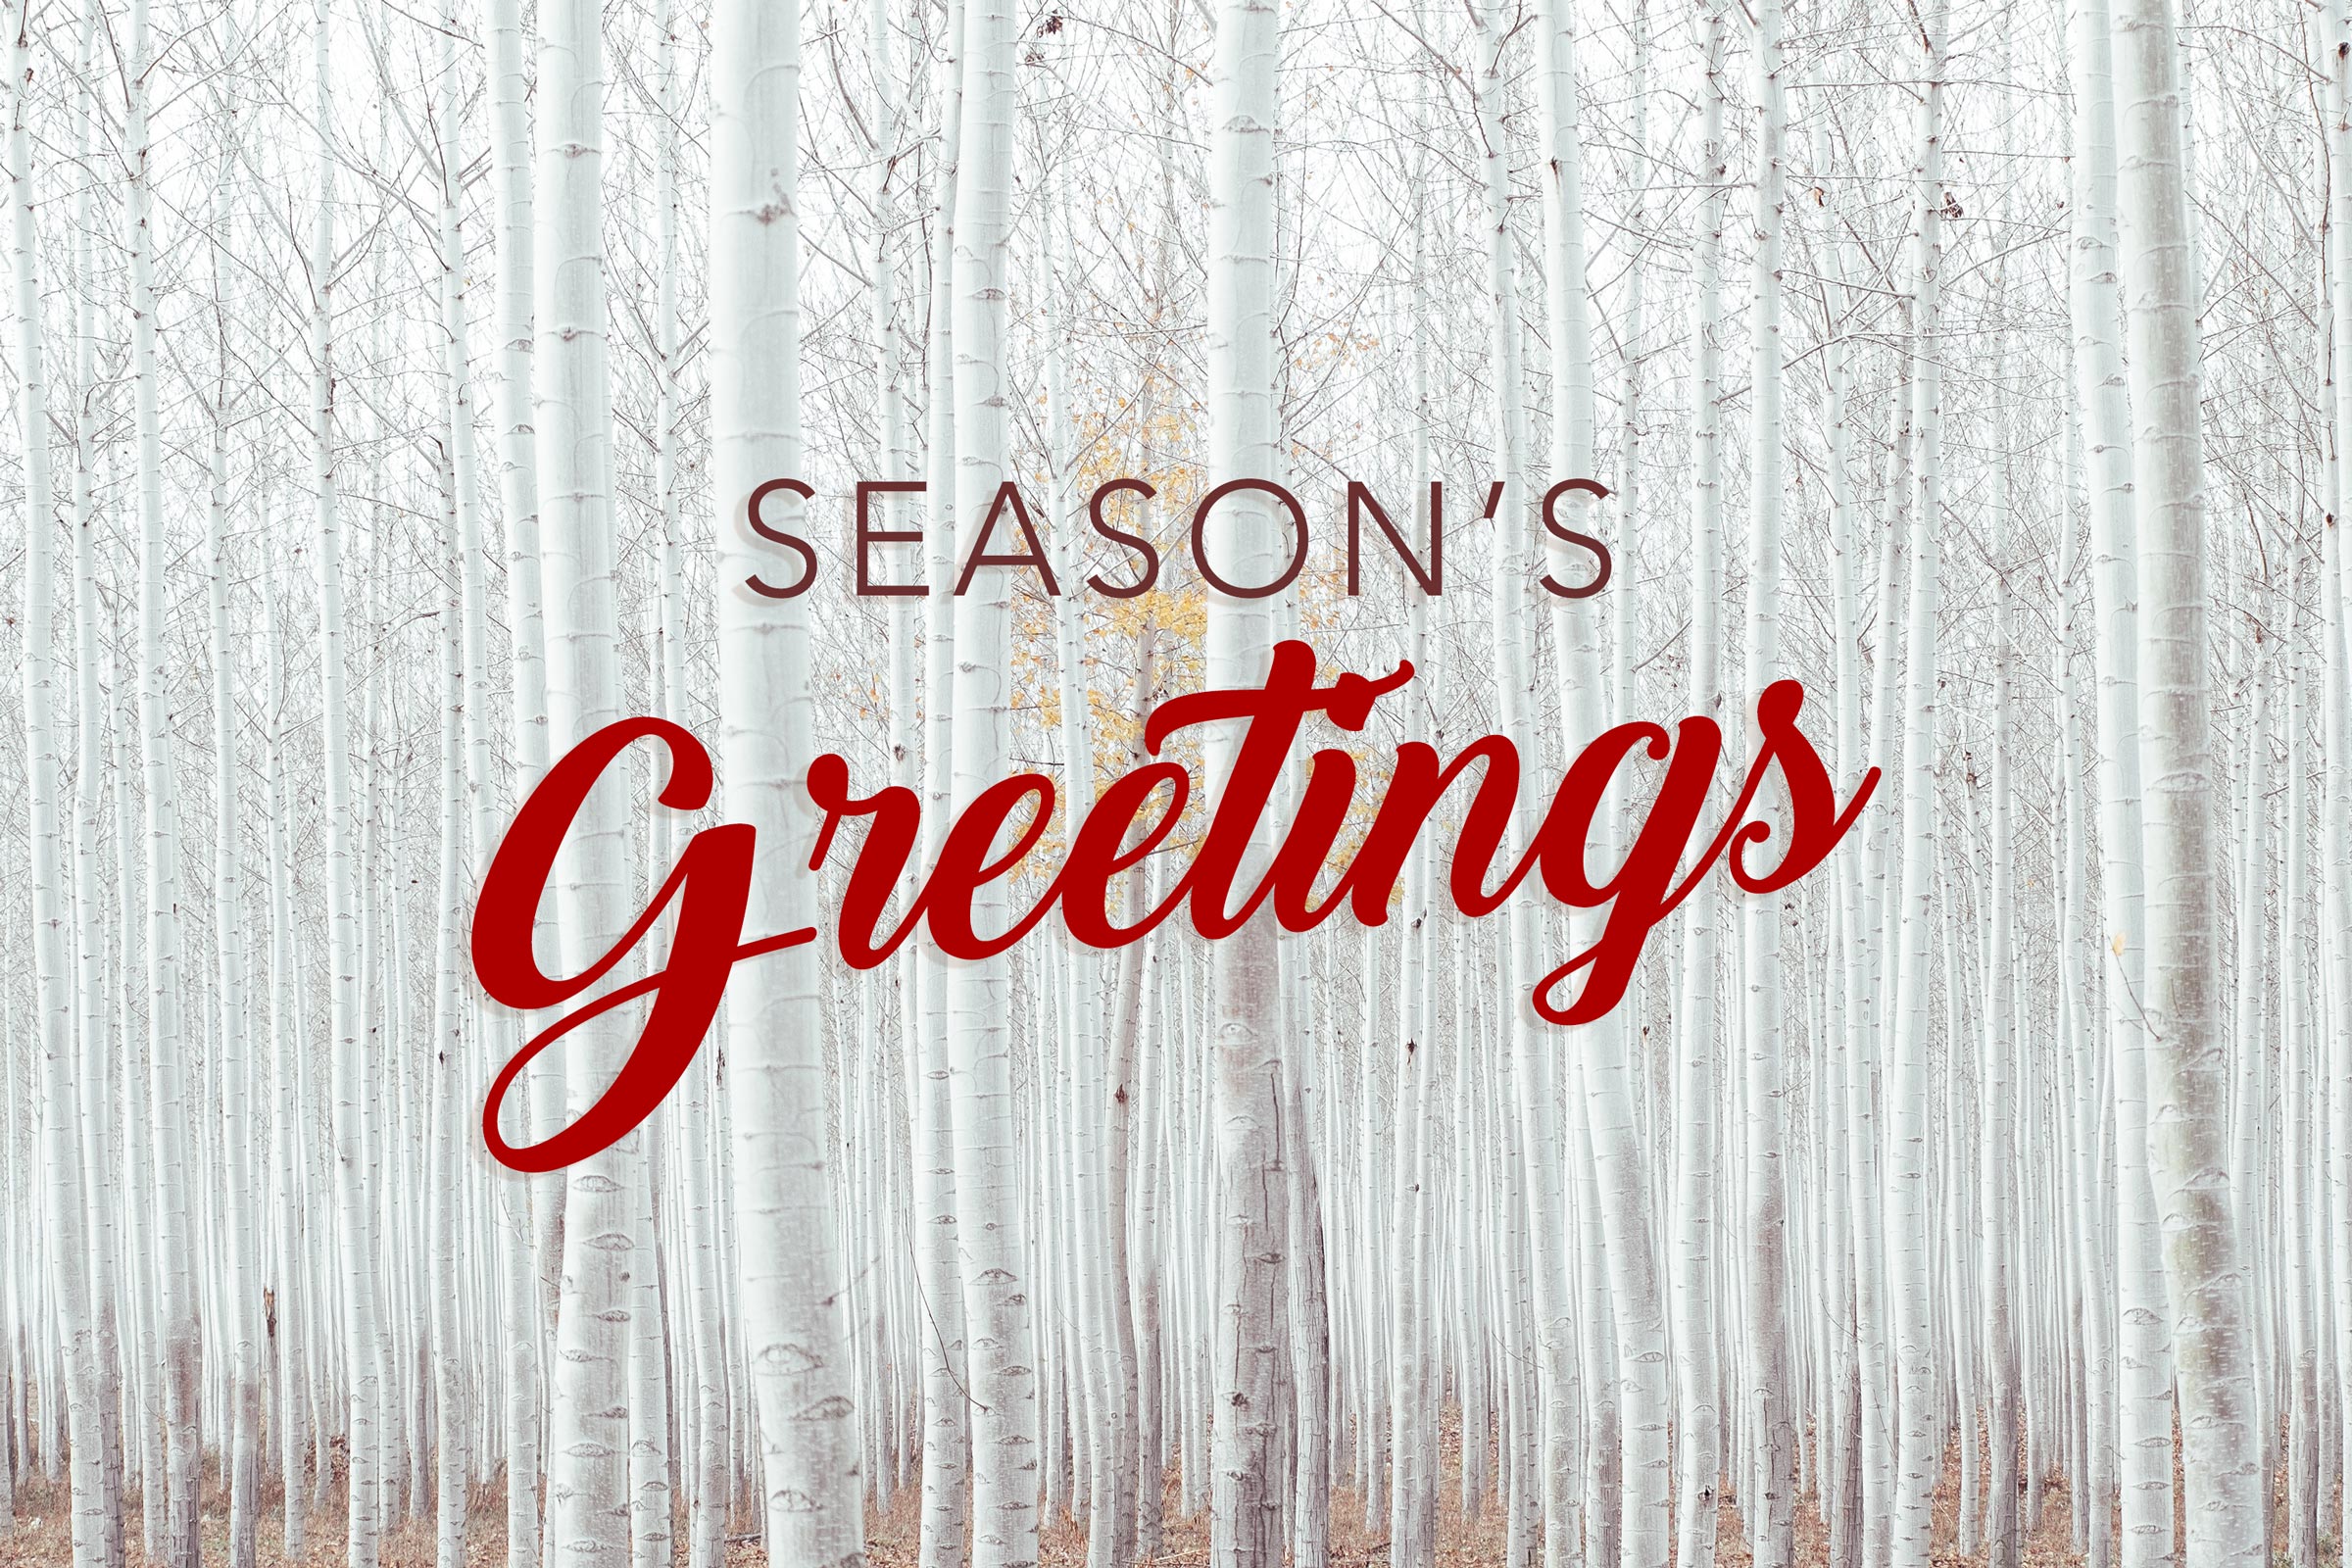 Free download 15 Seasons Greetings Cards Stock Images HD